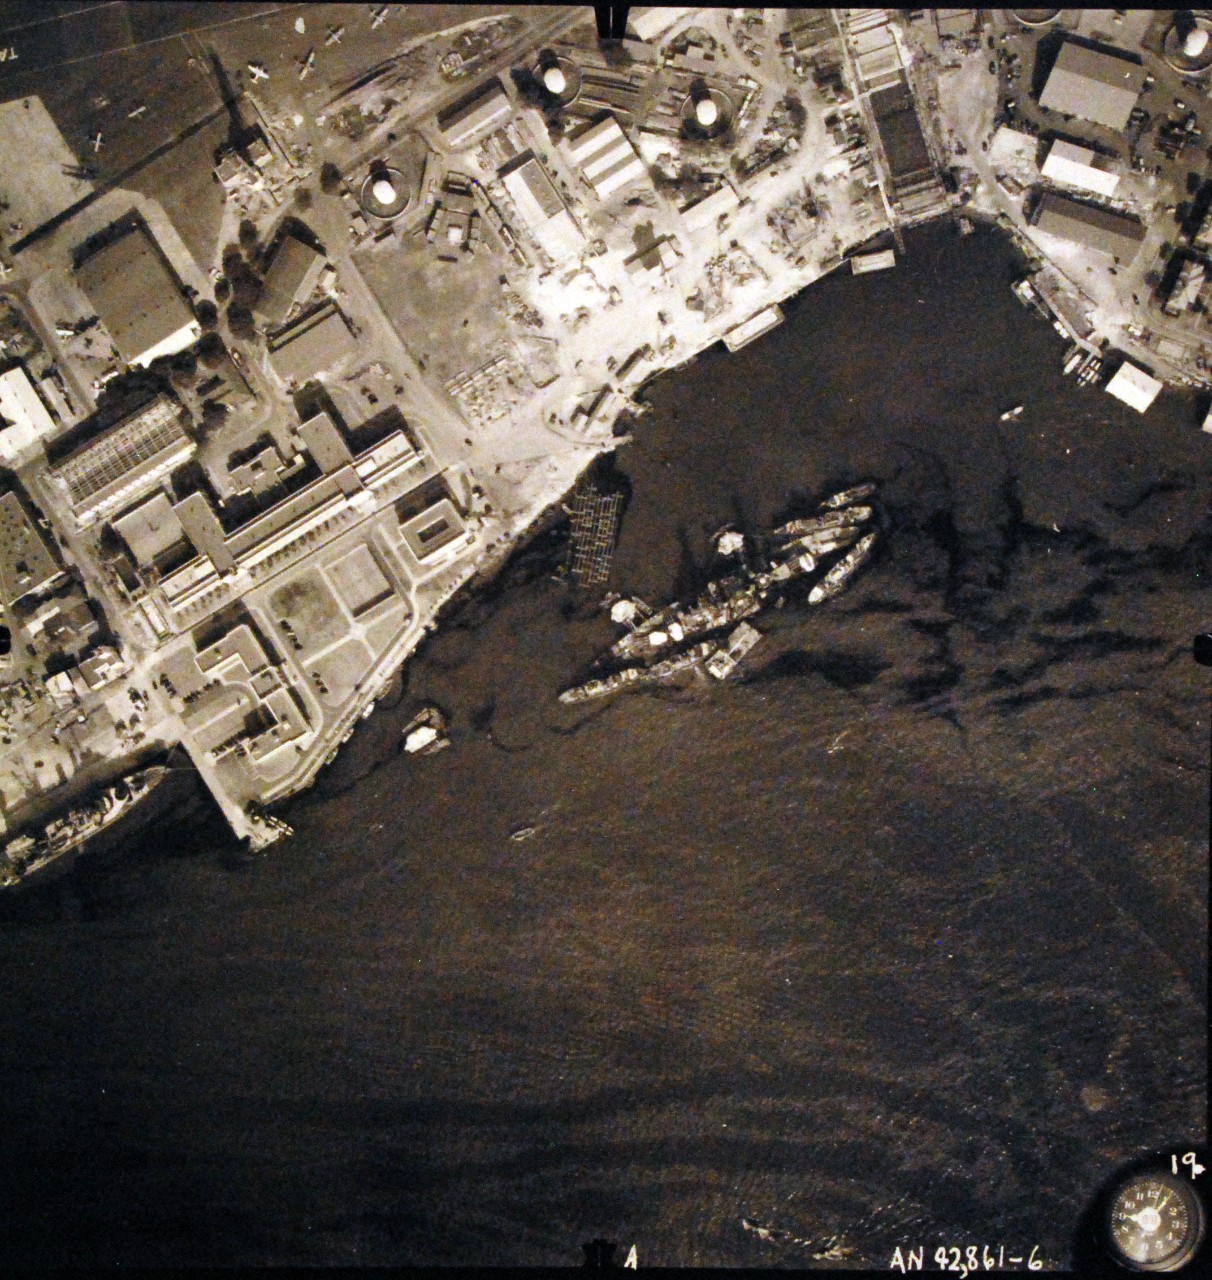 80-G-387567:  Pearl Harbor Attack, 7 December 1941.  Aerial view of "Battleship Row" moorings on the southern side of Ford Island, 10 December 1941, showing damage from the Japanese raid three days earlier.  USS California (BB 44) is shown.  Note dark oil streaks on the harbor surface, originating from the sunken battleships. Photographed by VJ-1 at an altitude of 3,000 feet and released November 9, 1950. U.S. Navy photograph, now in the collections of the National Archives   (9/22/2015).